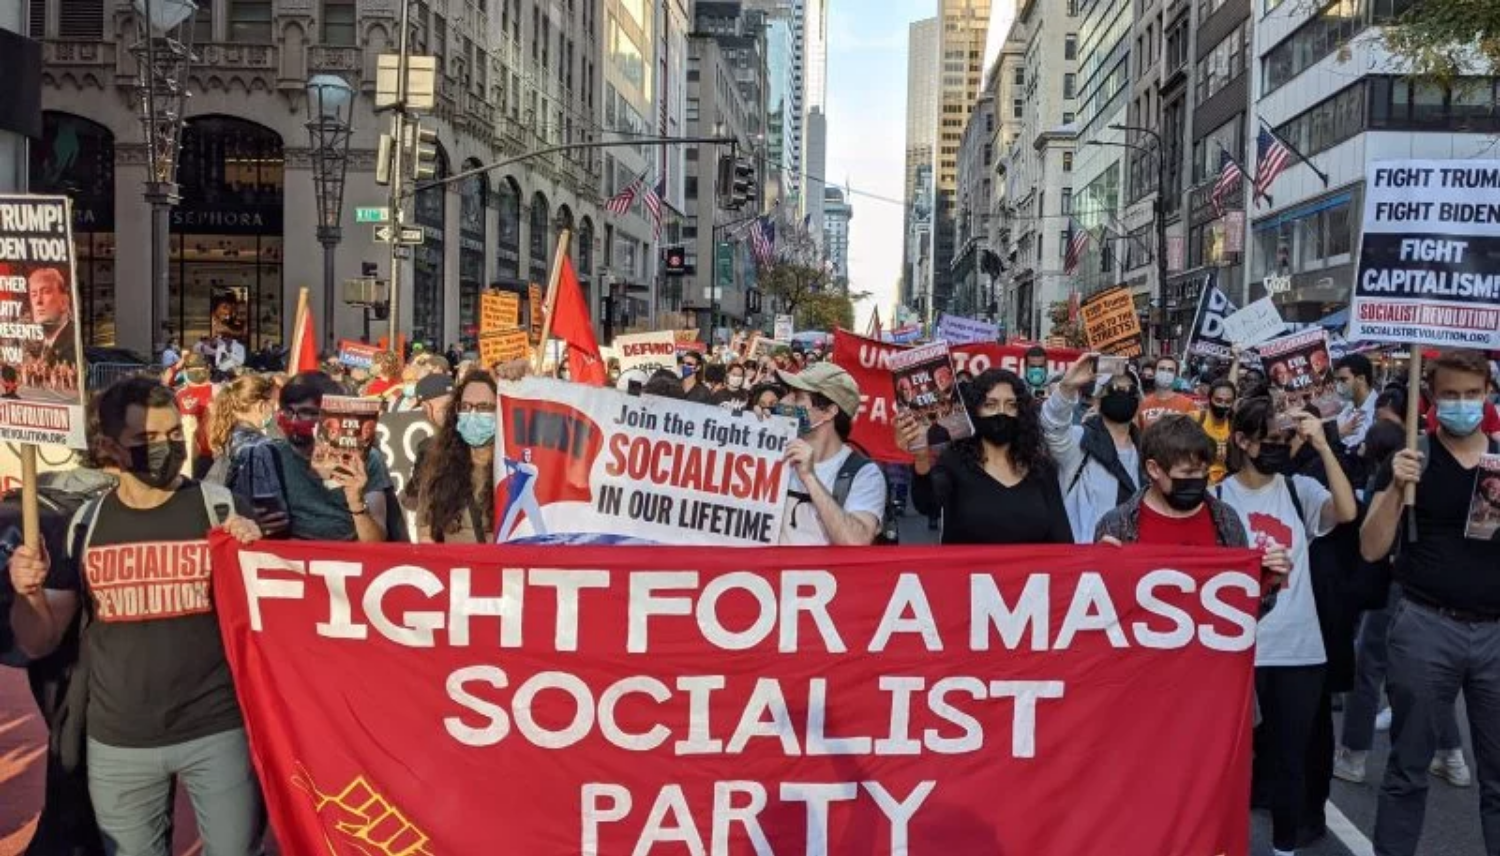 fighr for mass party Image Socialist Revolution